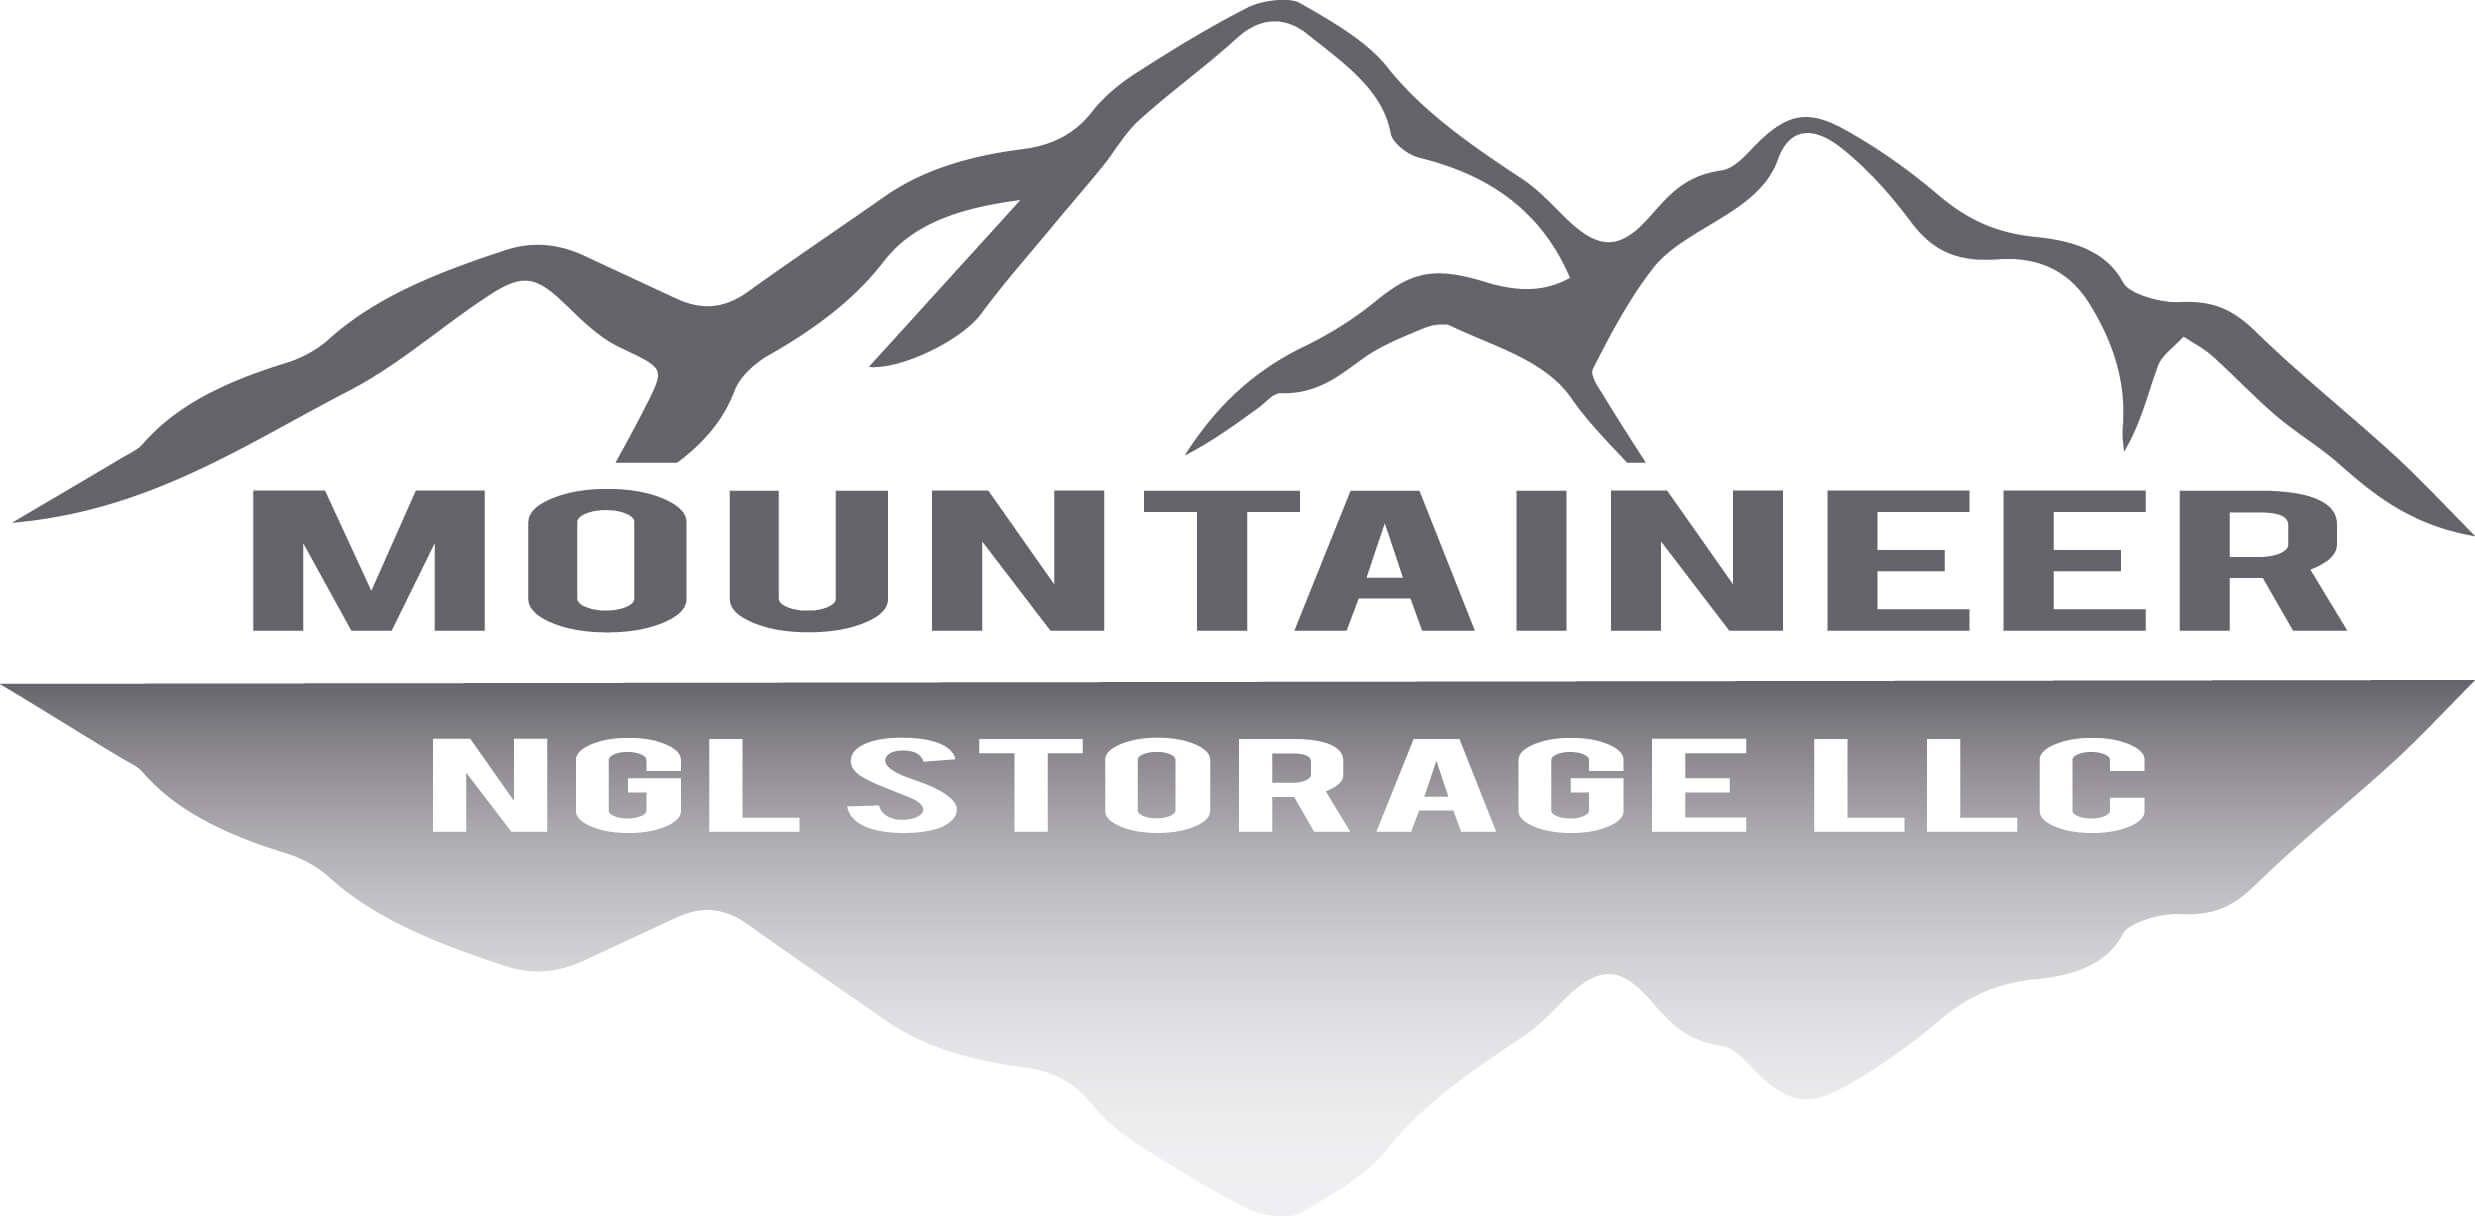 NGL Logo - Mountaineer NGL Included in U.S. Department of Energy Natural Gas